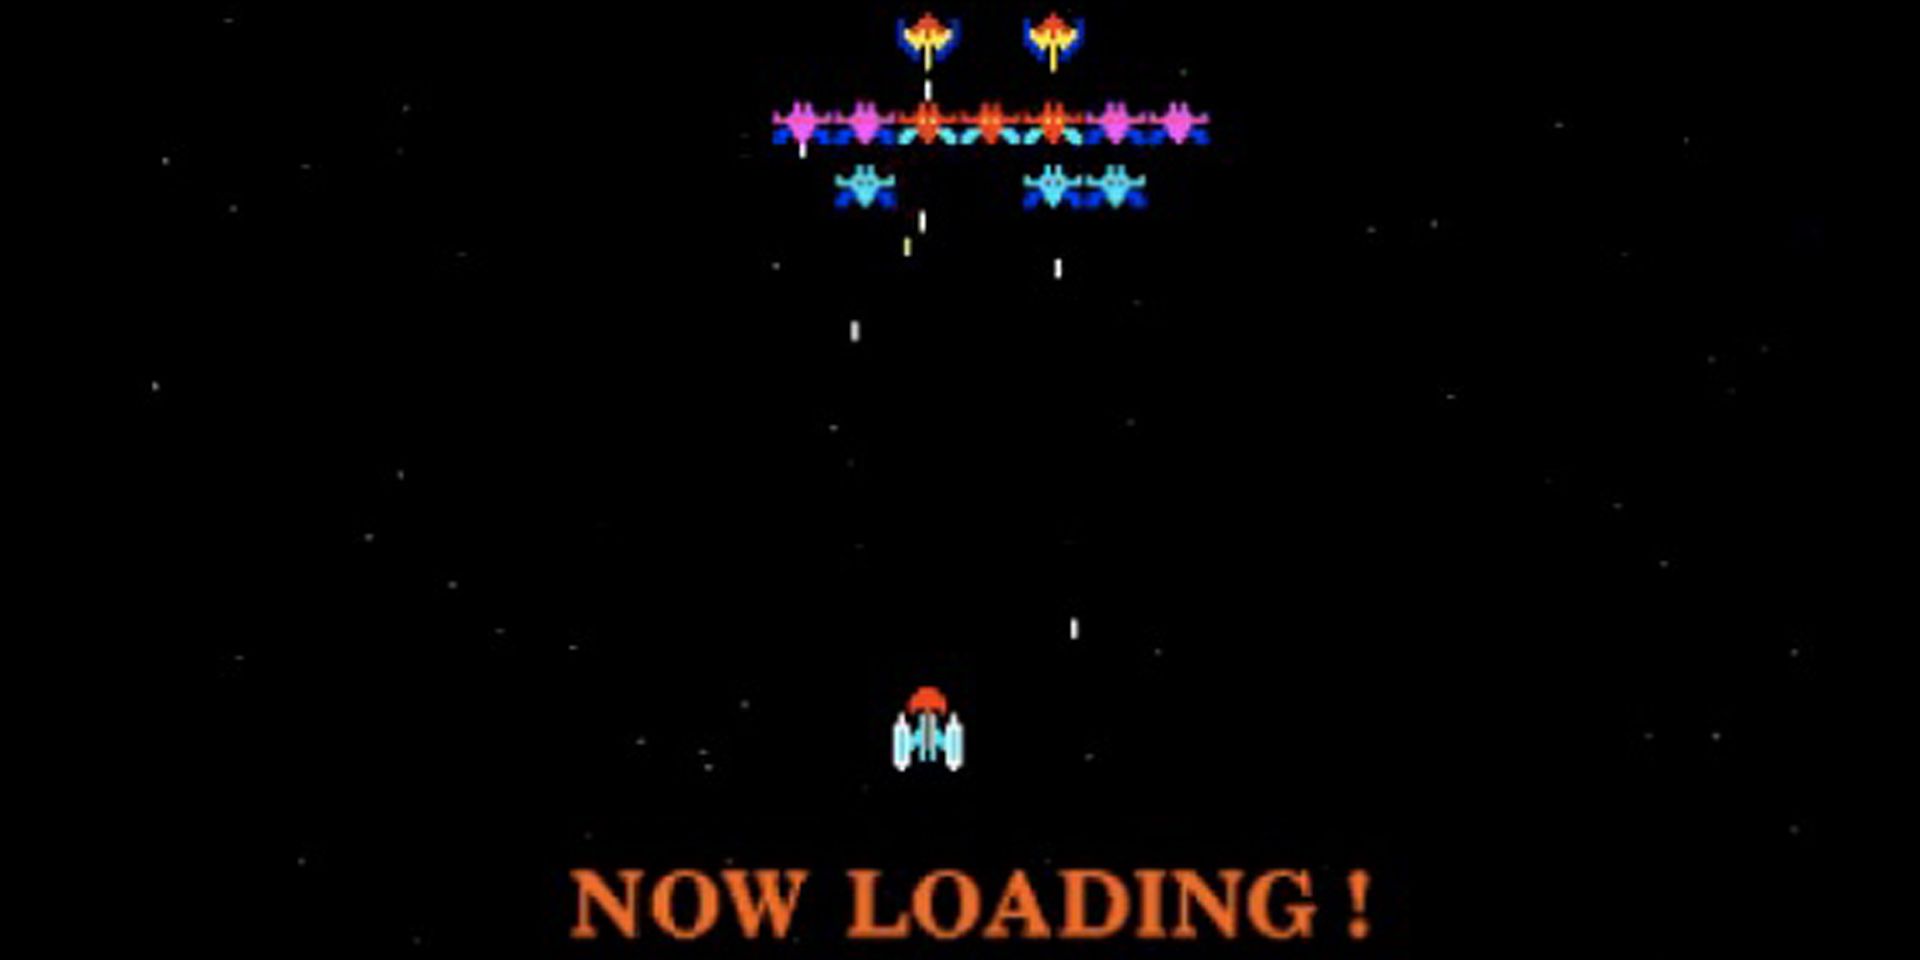 Players go with Galaxian before competing in Ridge Racer.